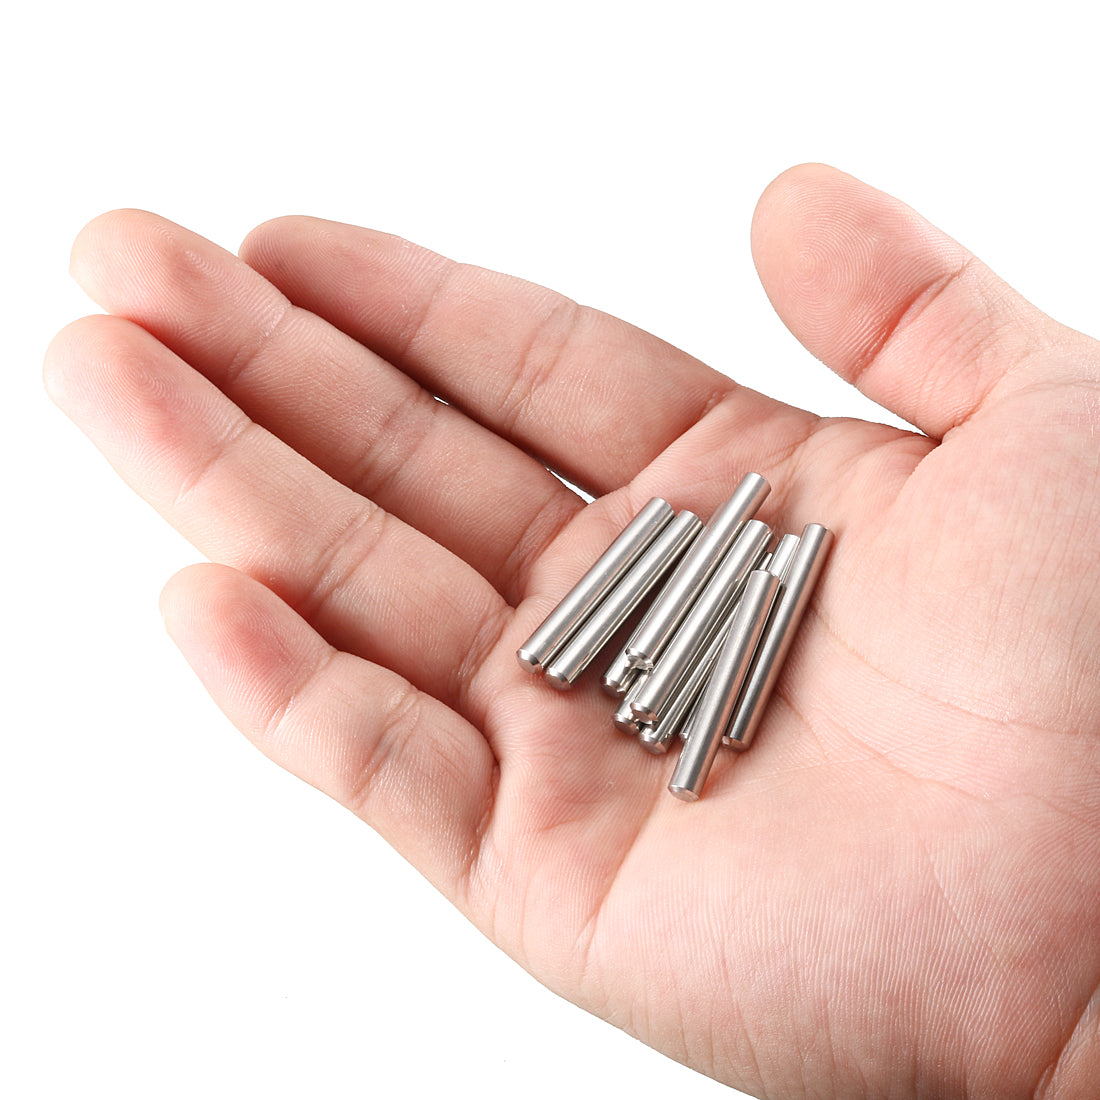 uxcell Uxcell 10Pcs 4mm x 30mm Dowel Pin 304 Stainless Steel Cylindrical Shelf Support Pin